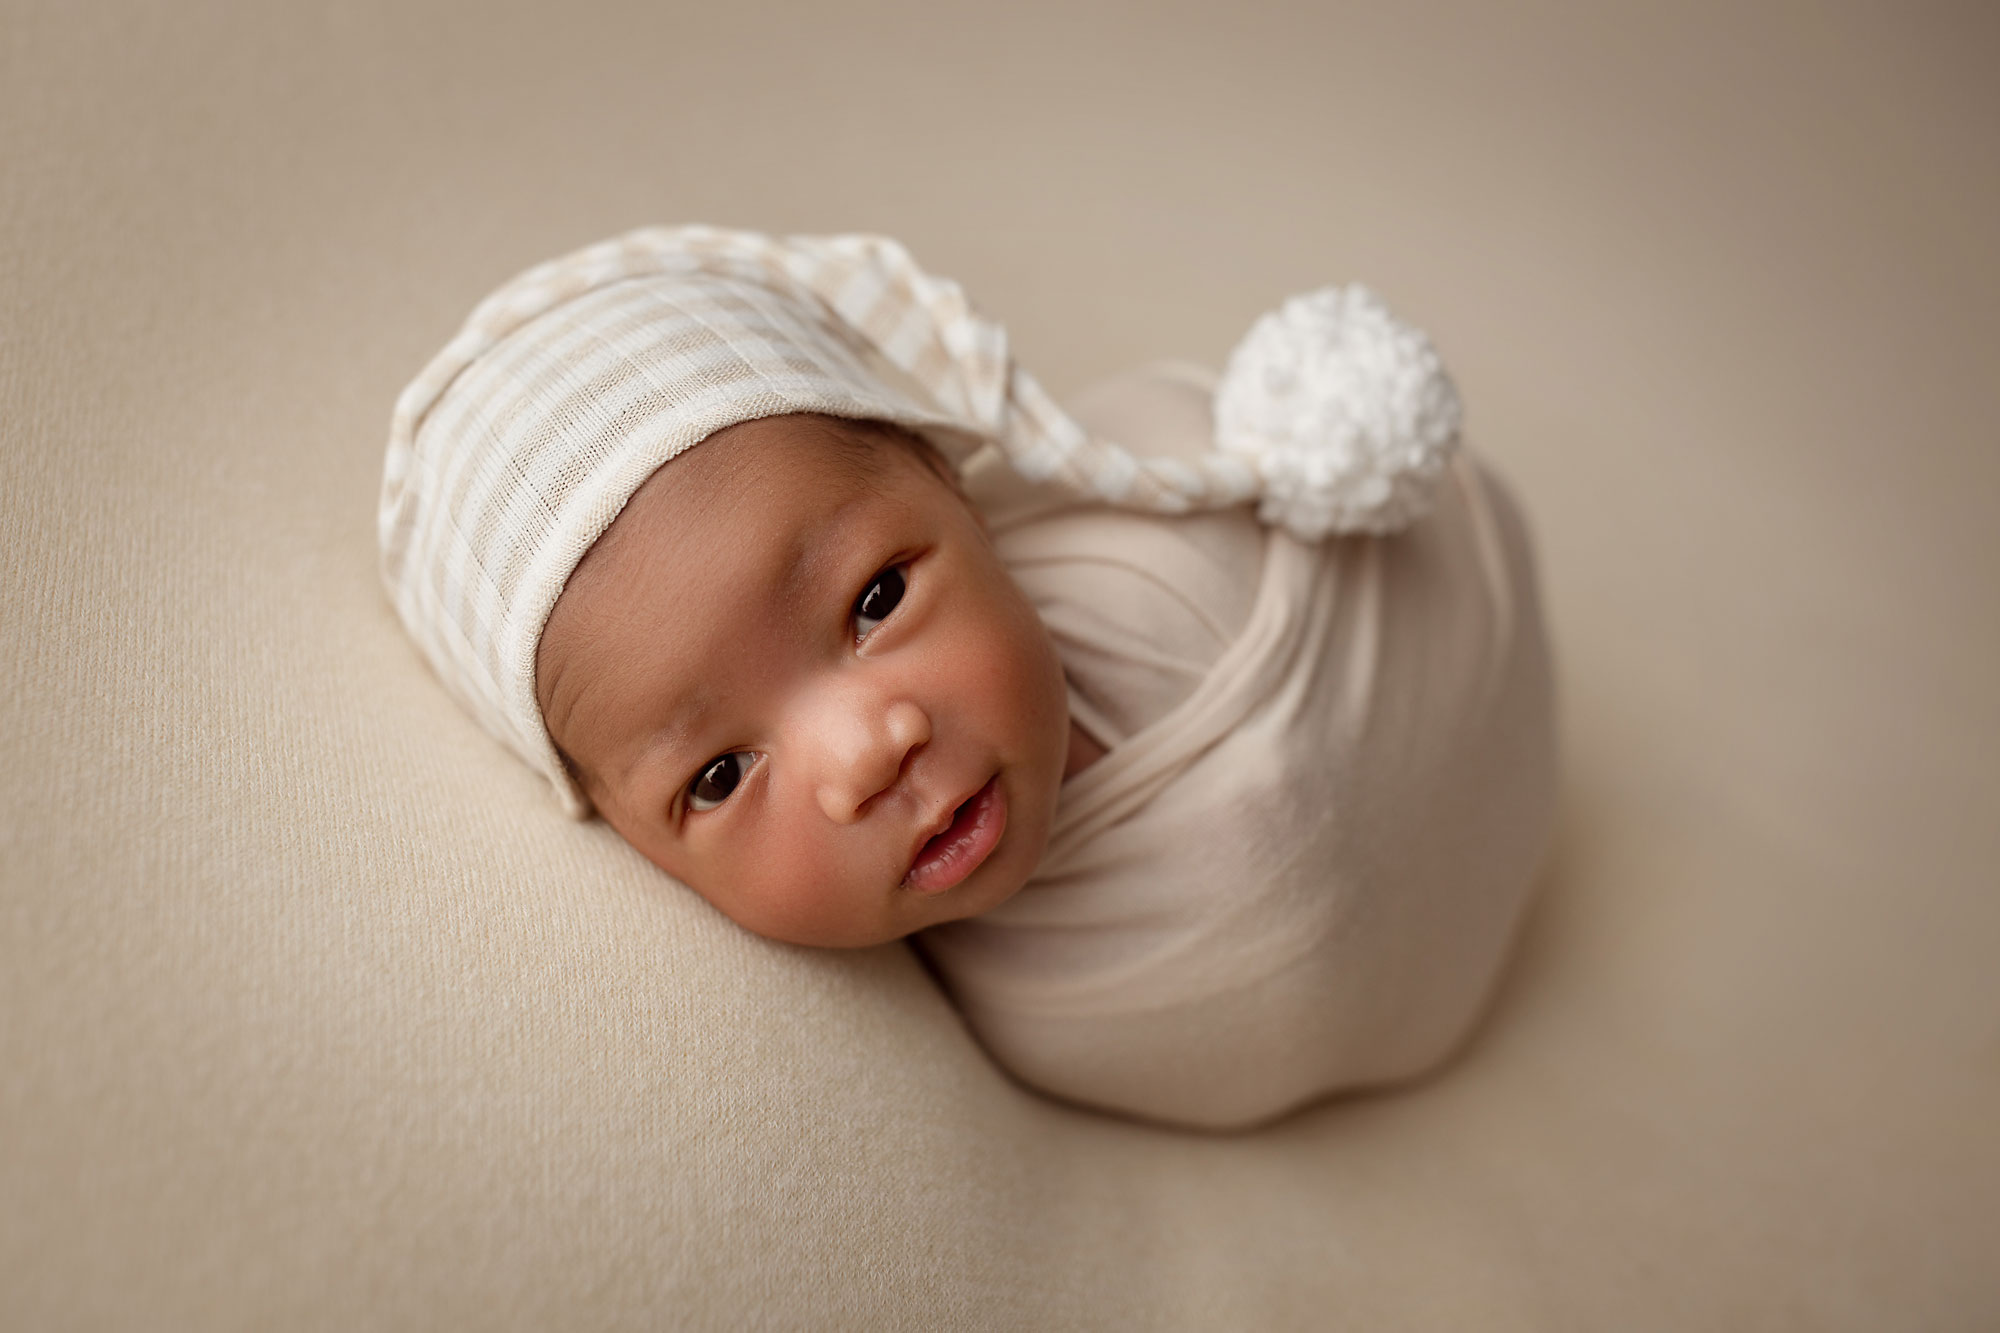 newborn pictures near me, swaddled baby boy in white hat looking at camera